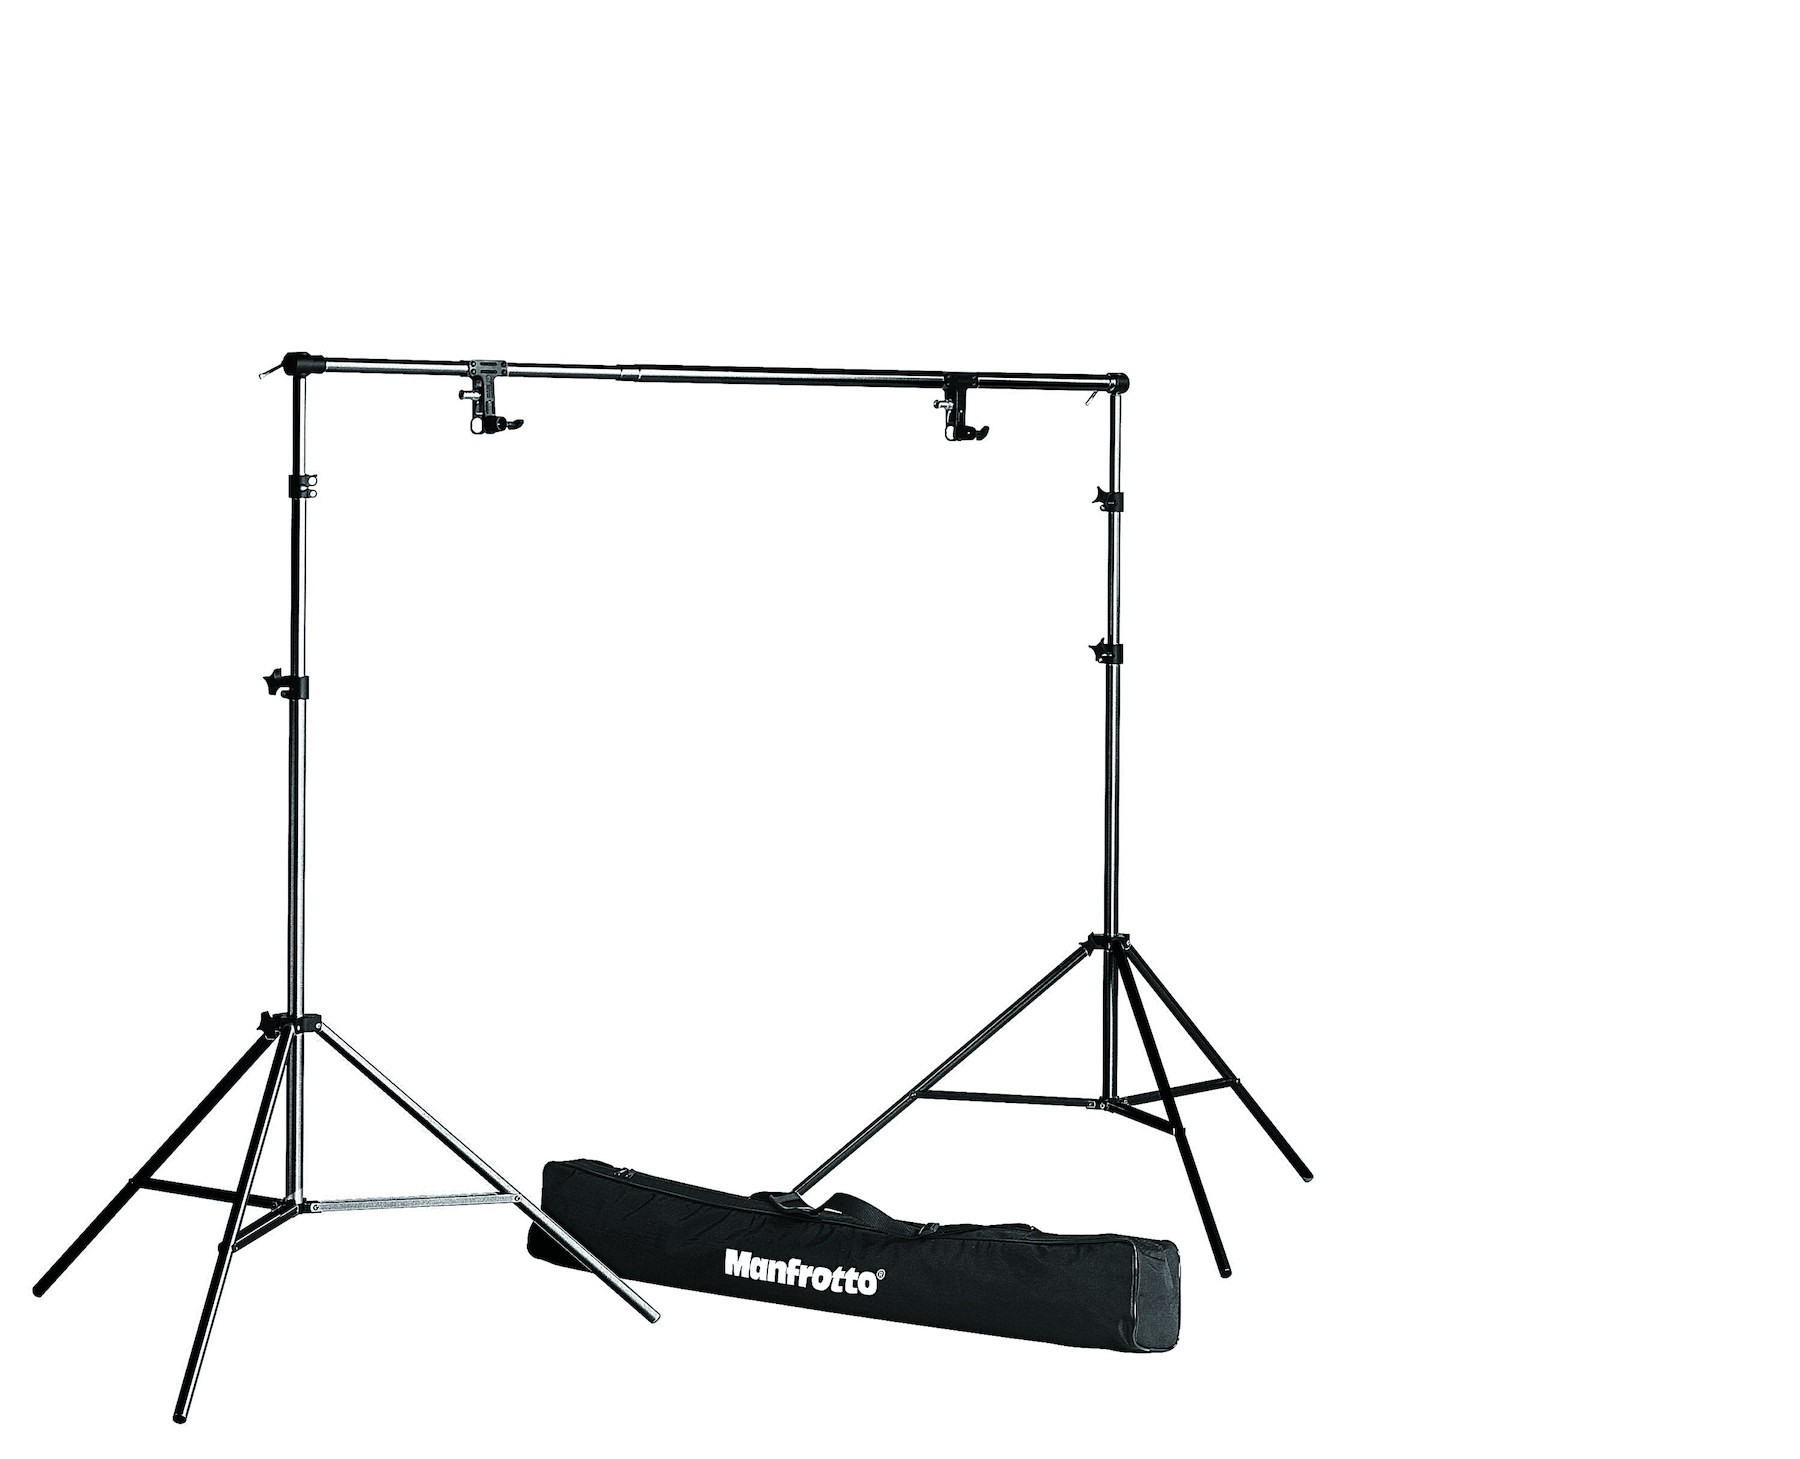 Photo stand, Support, Bag and Spring, Complete Set